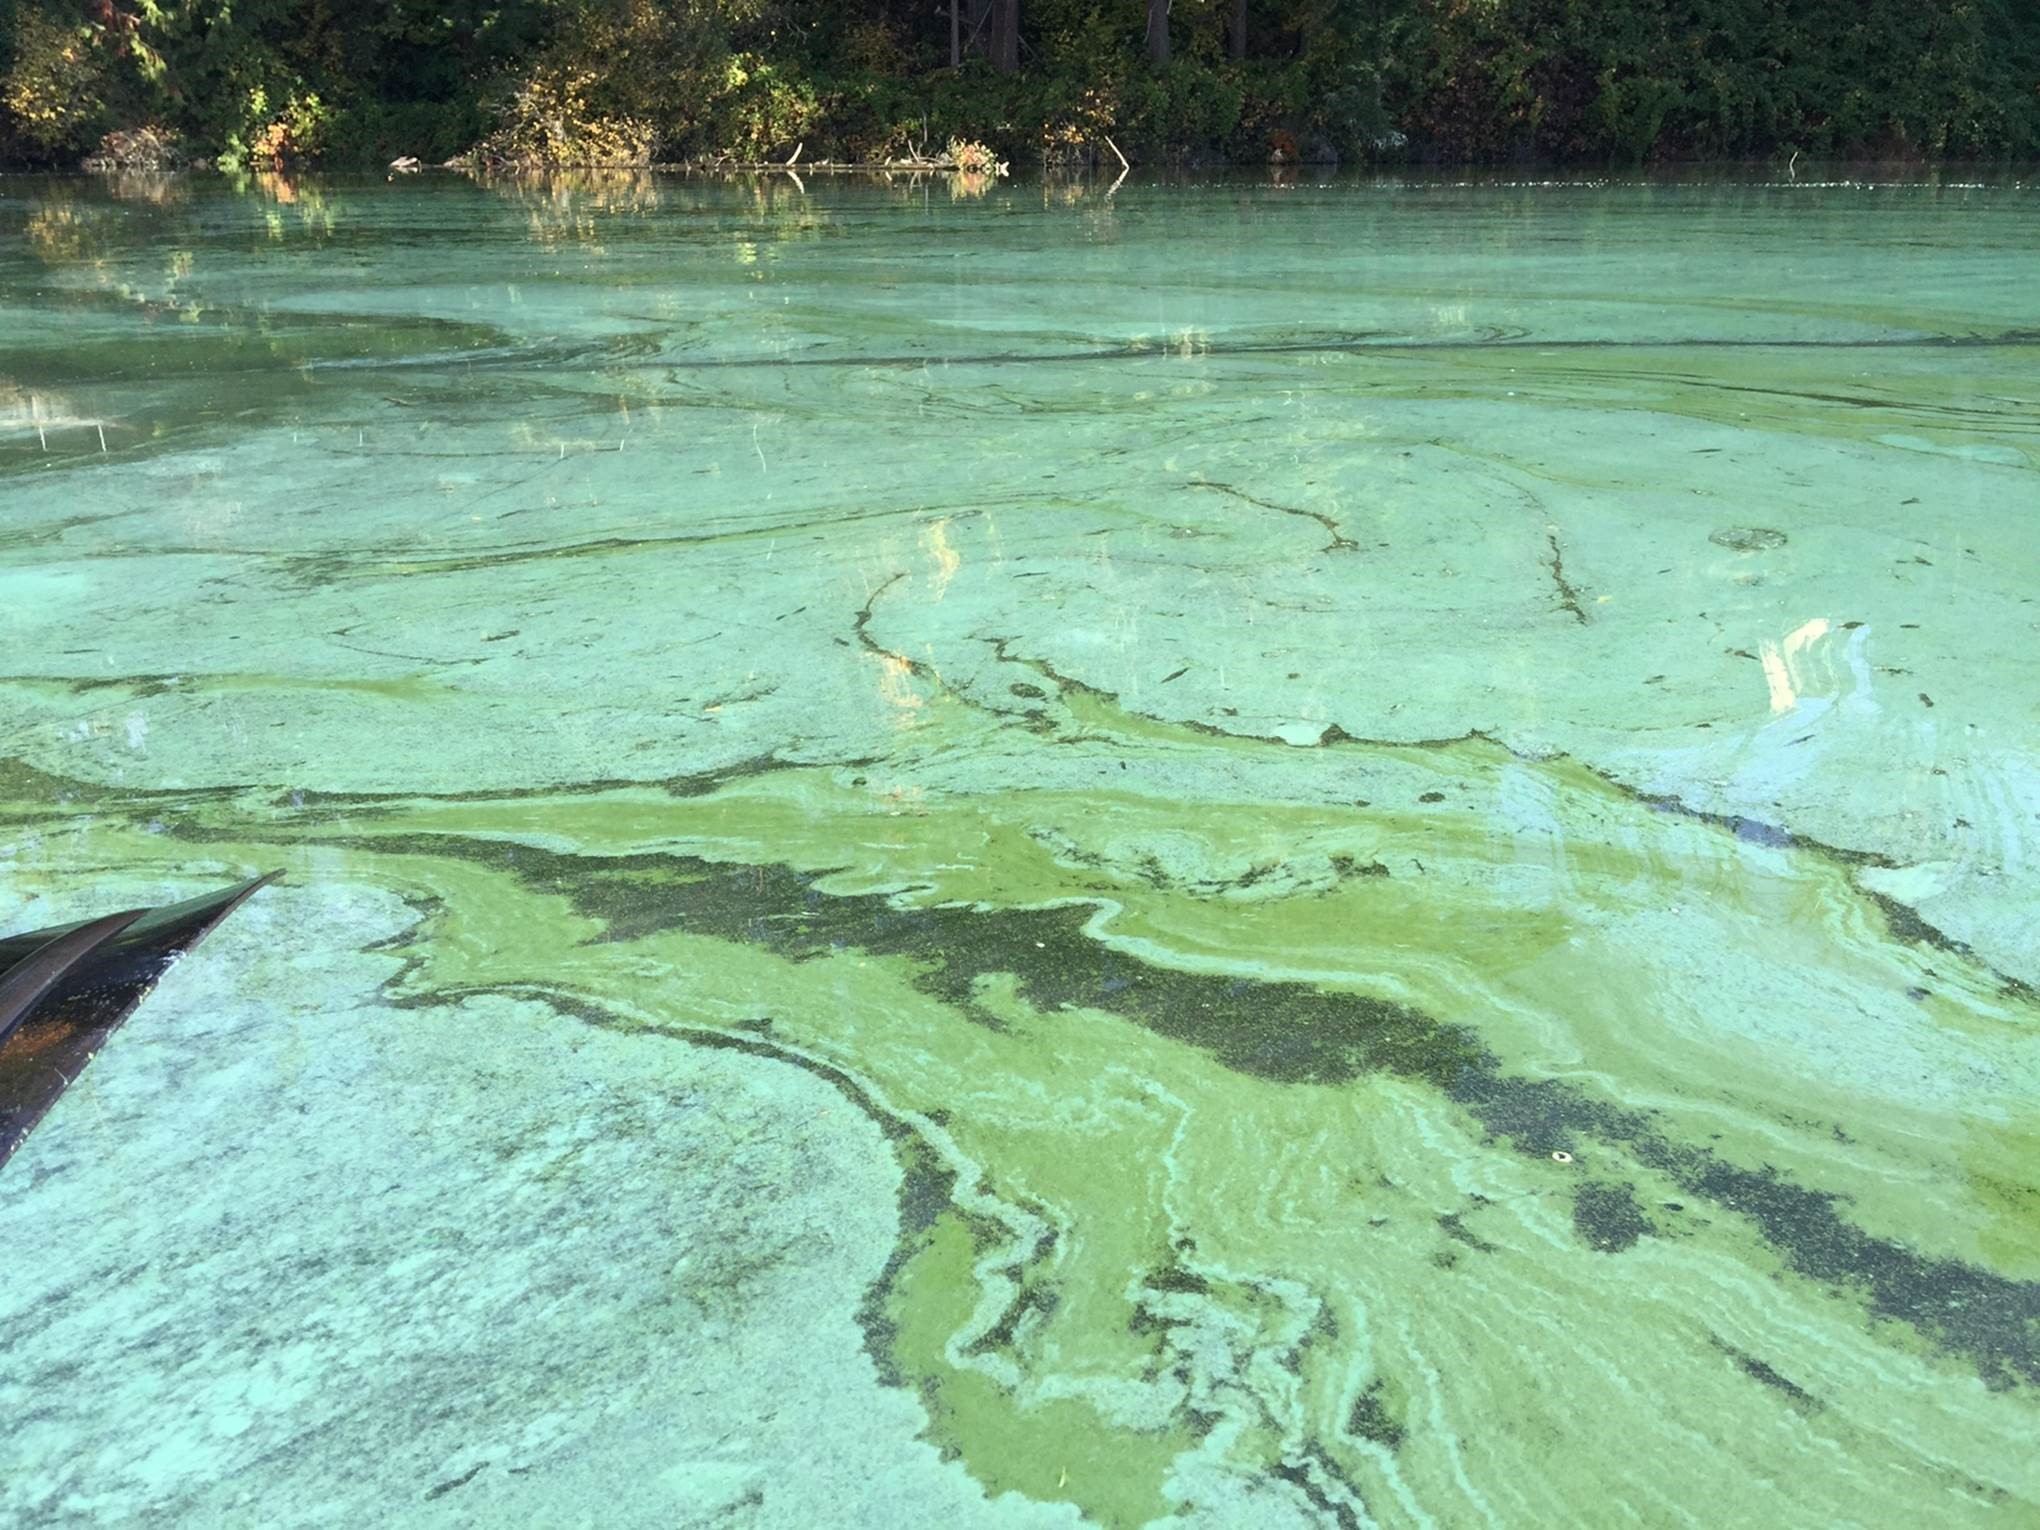 Green slime covering surface of a lake.